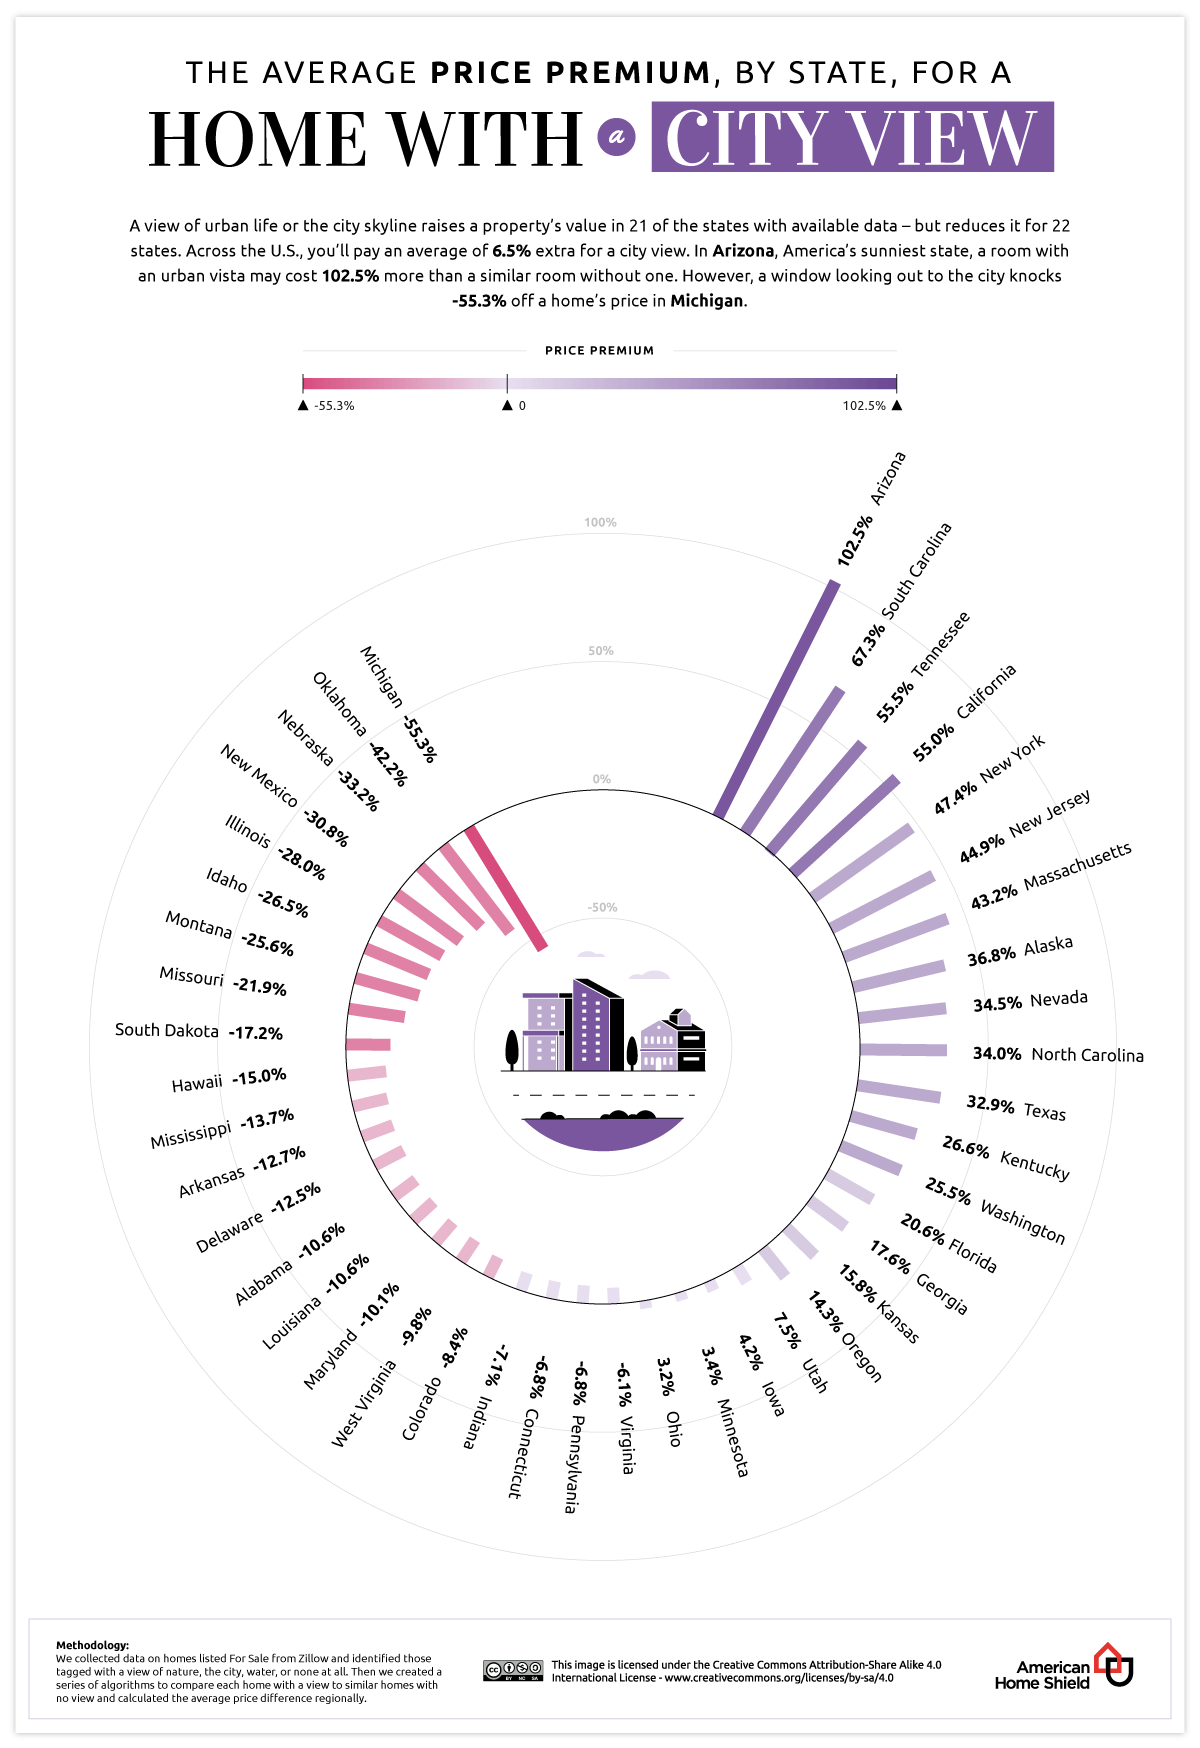 Average Price Premium by state for a home with a city view